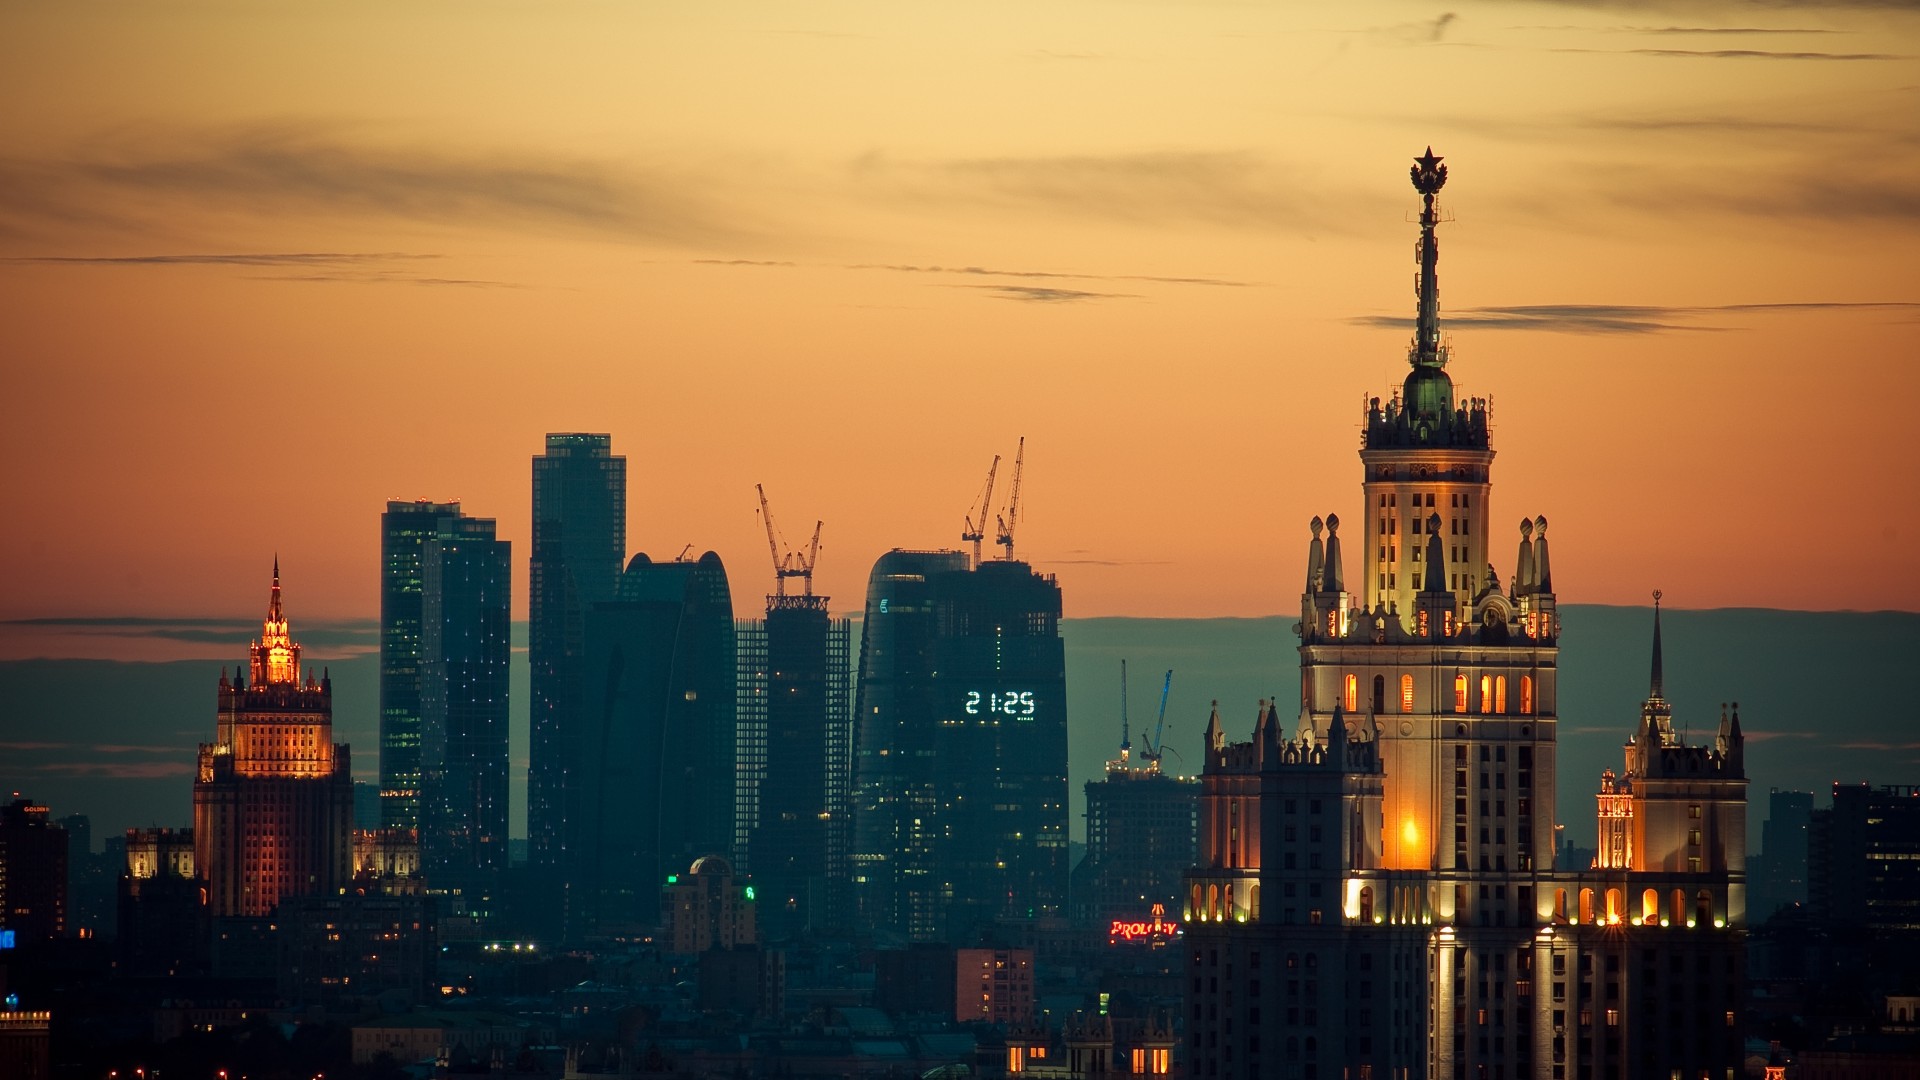 Moscow, Sunset, downtown, travel, sky (horizontal)